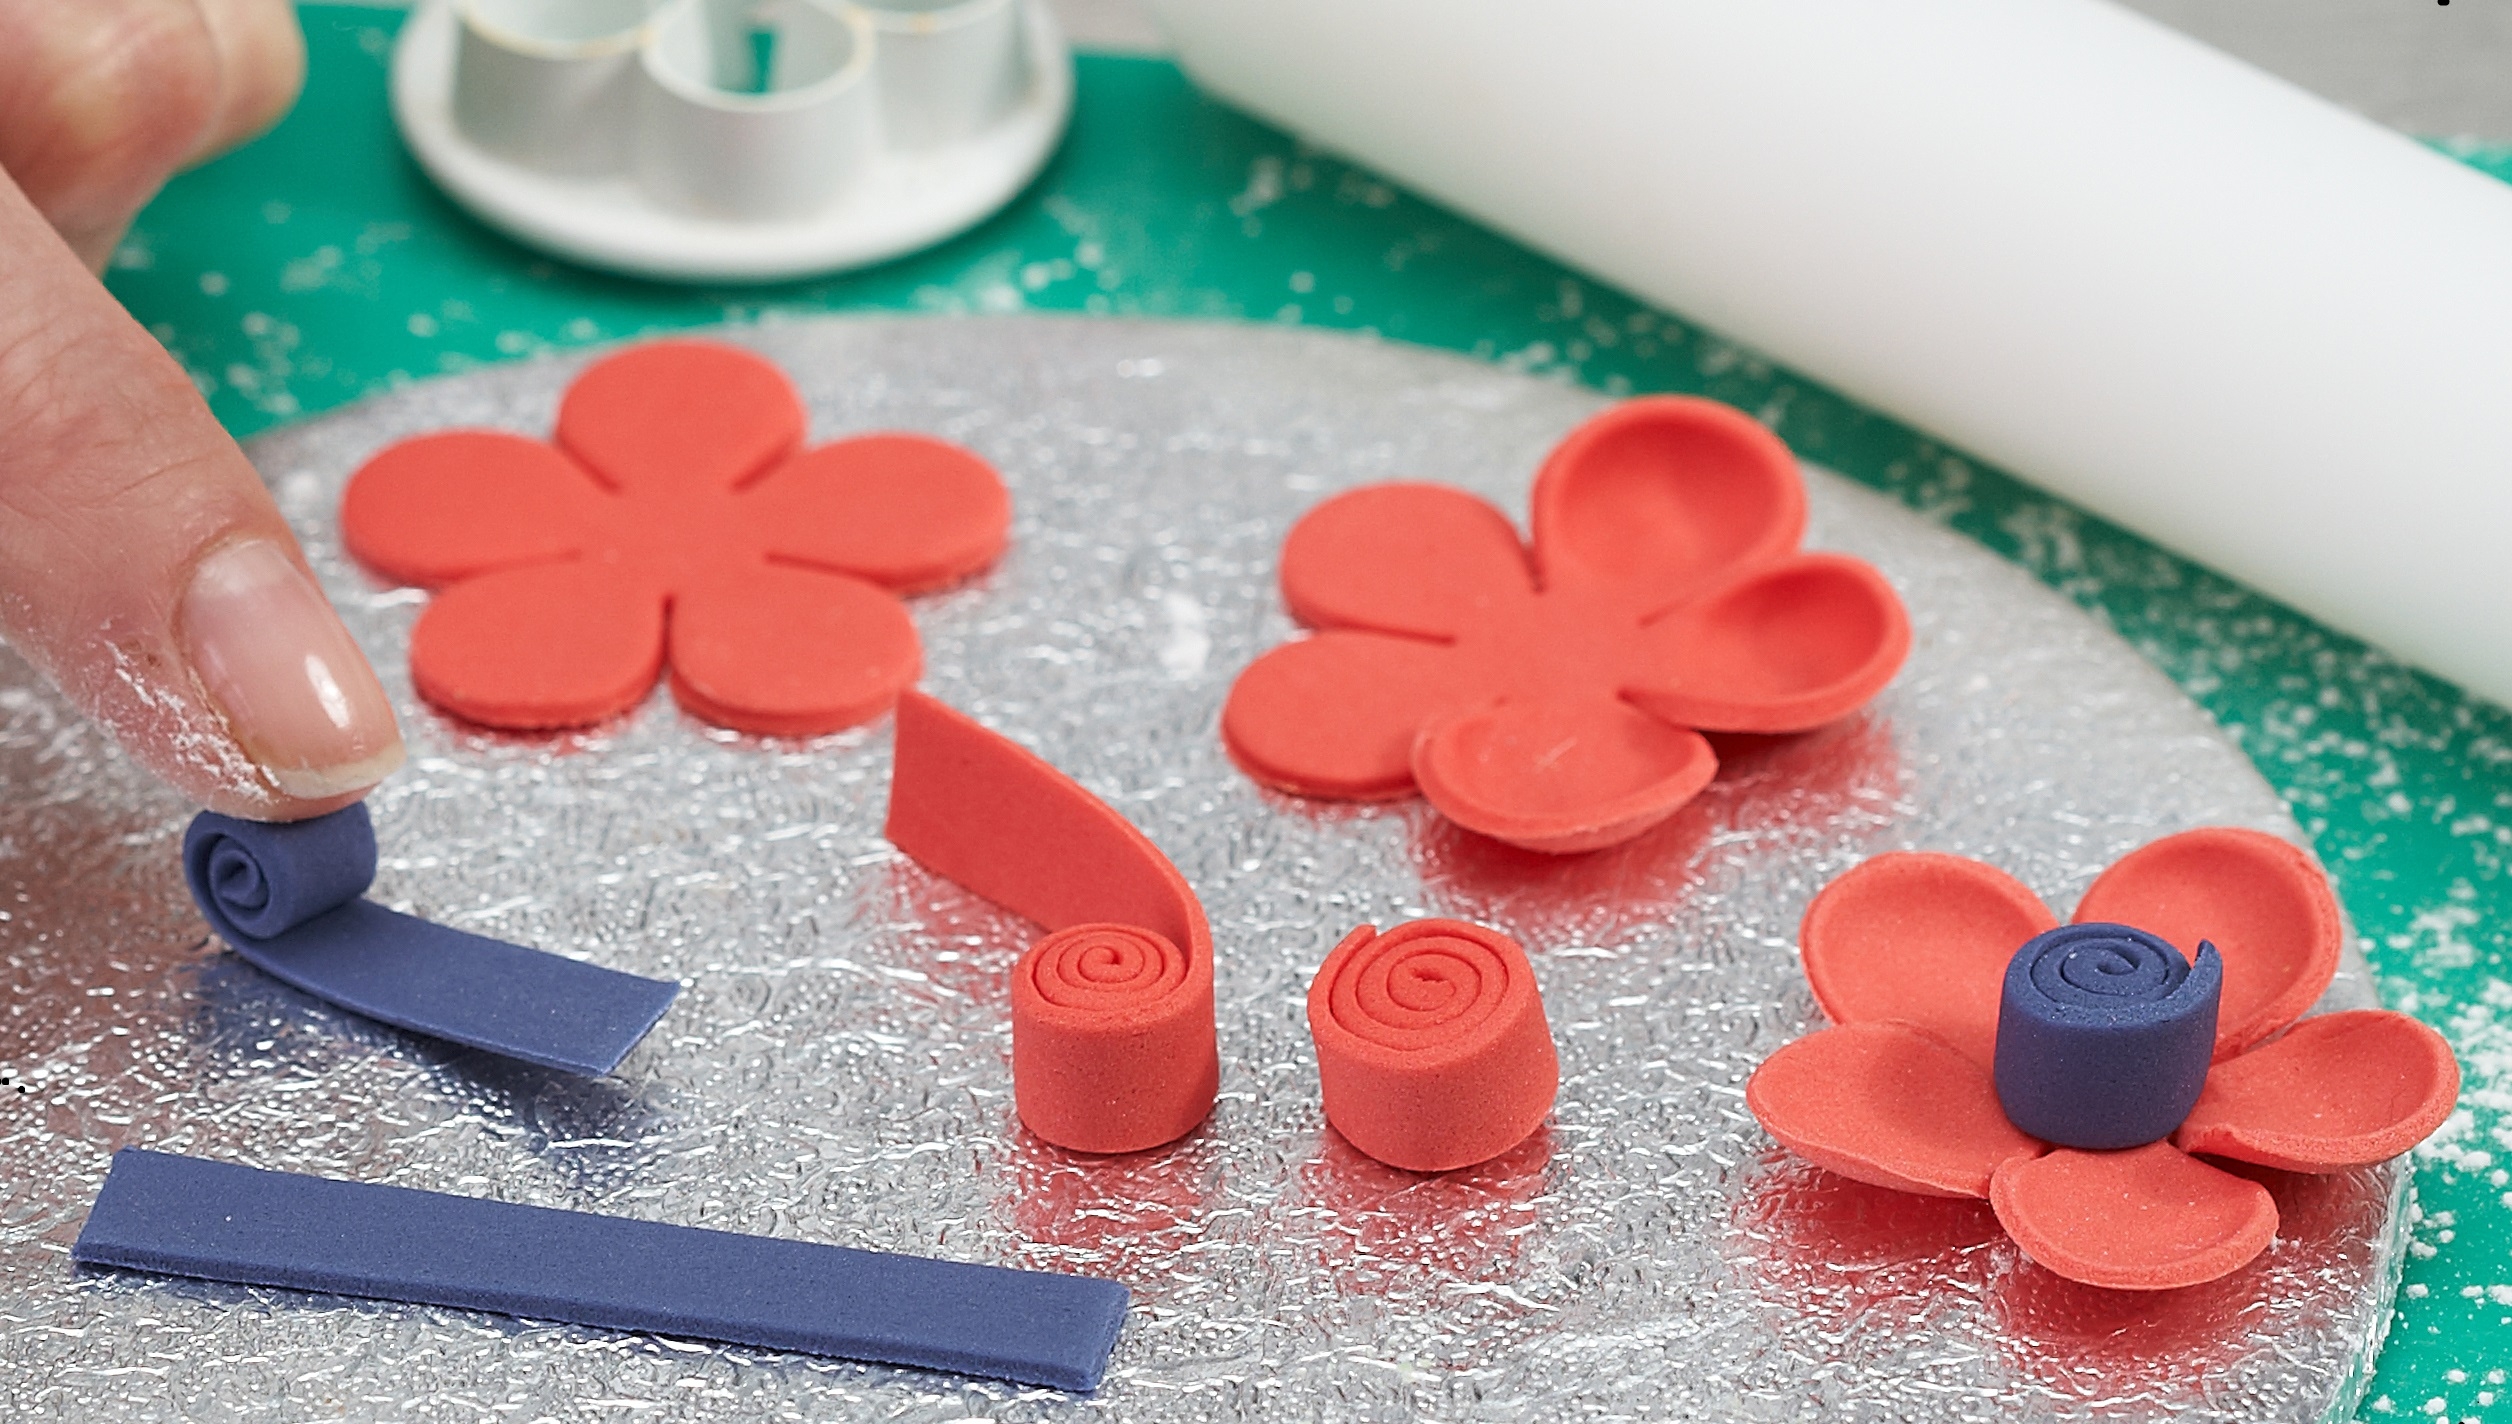 How to make a Red Flower with a Quilled Centre